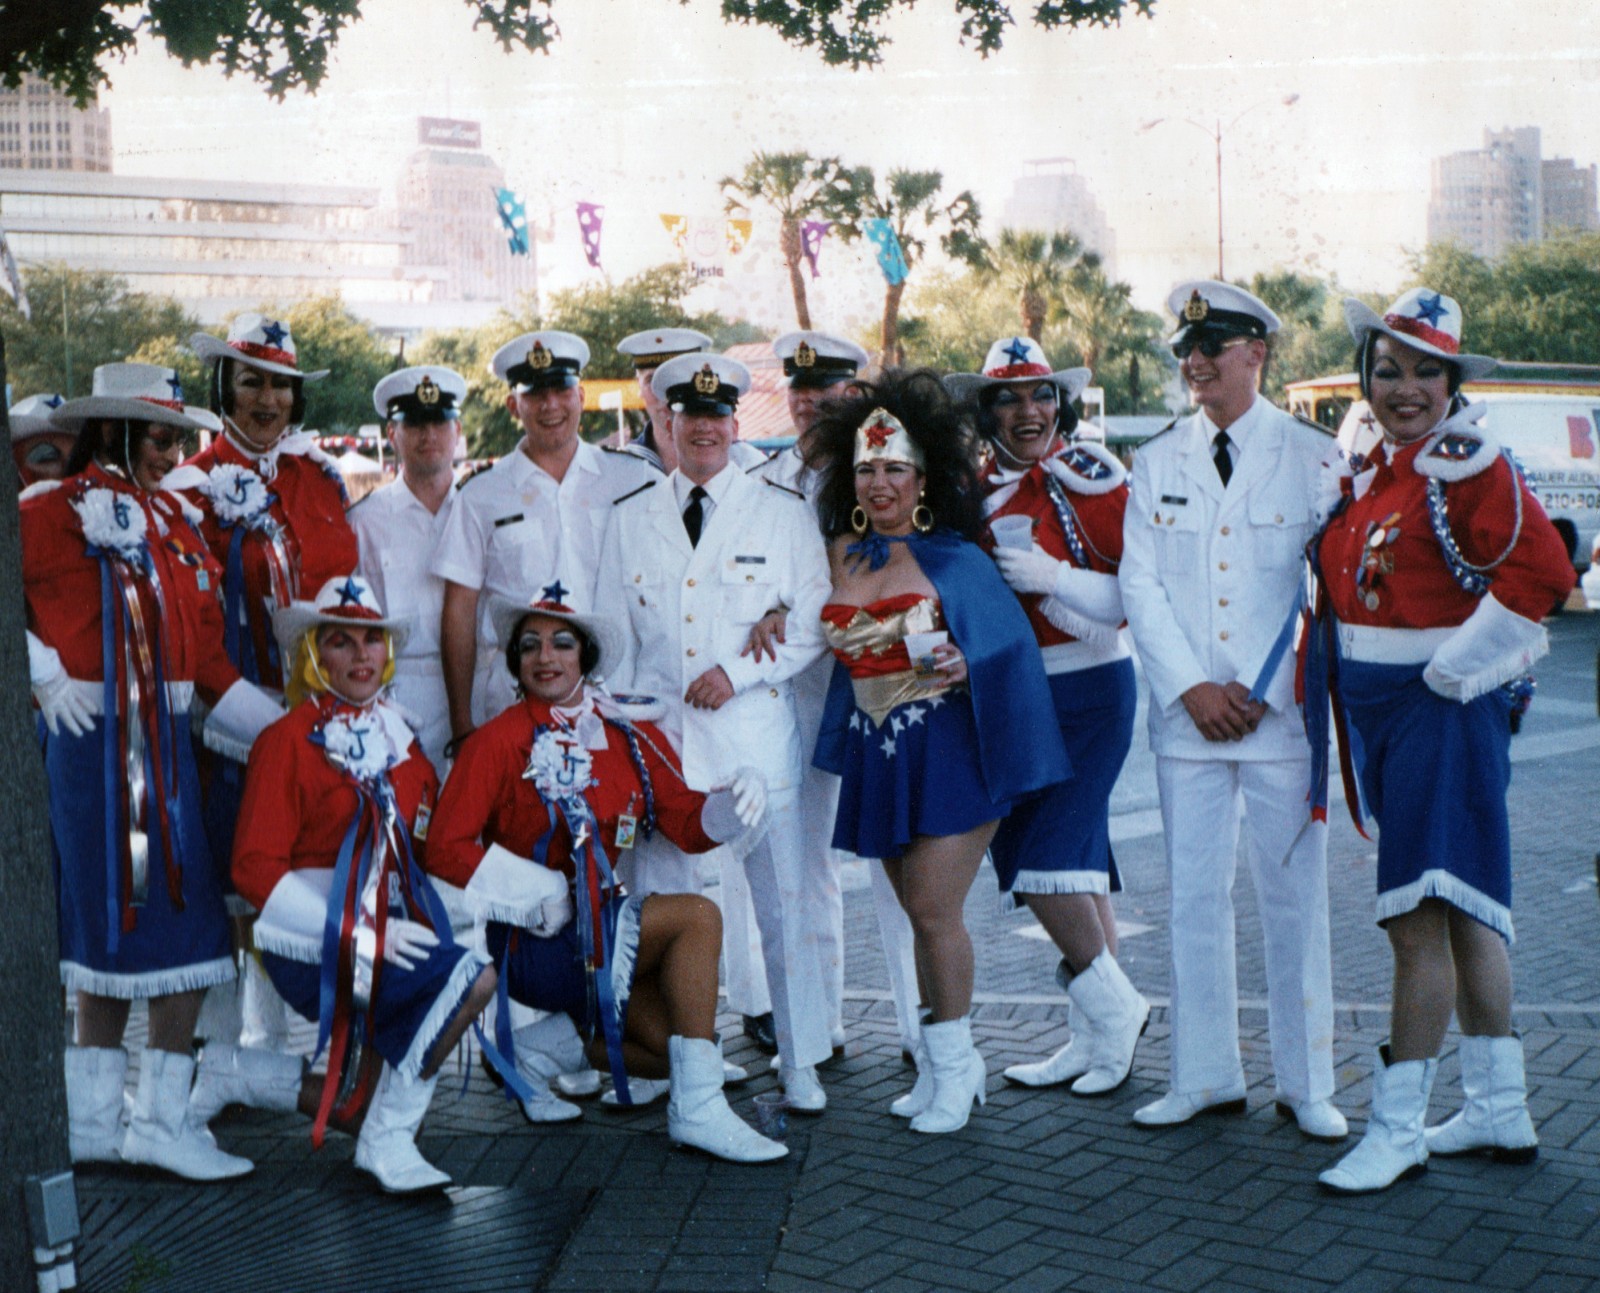 "Chicana Wonder Woman" Lisa Suarez flanked by Cornyation cast members and Russian soldiers